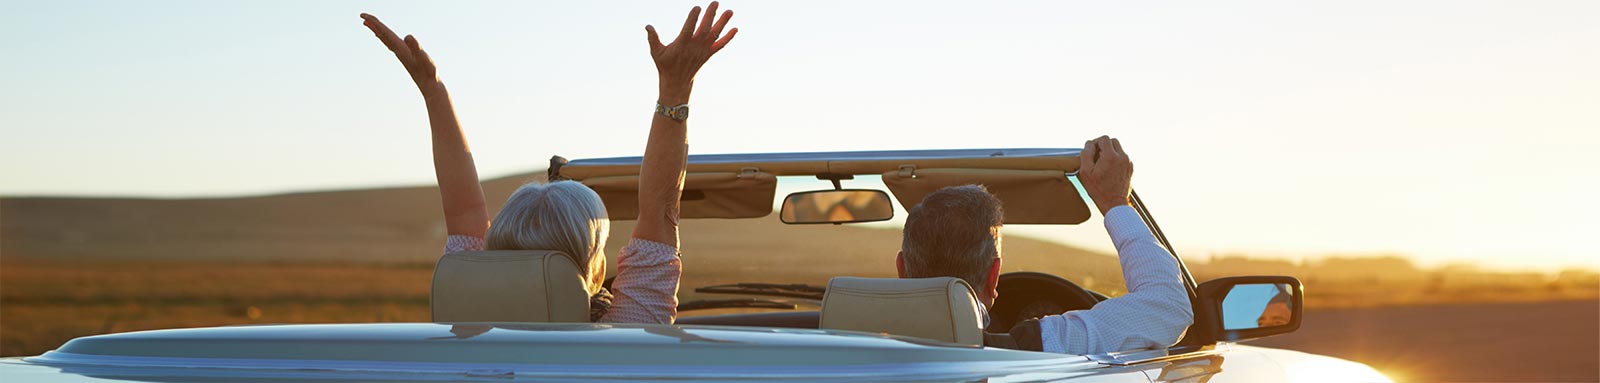 Mature couple in convertible car on open road